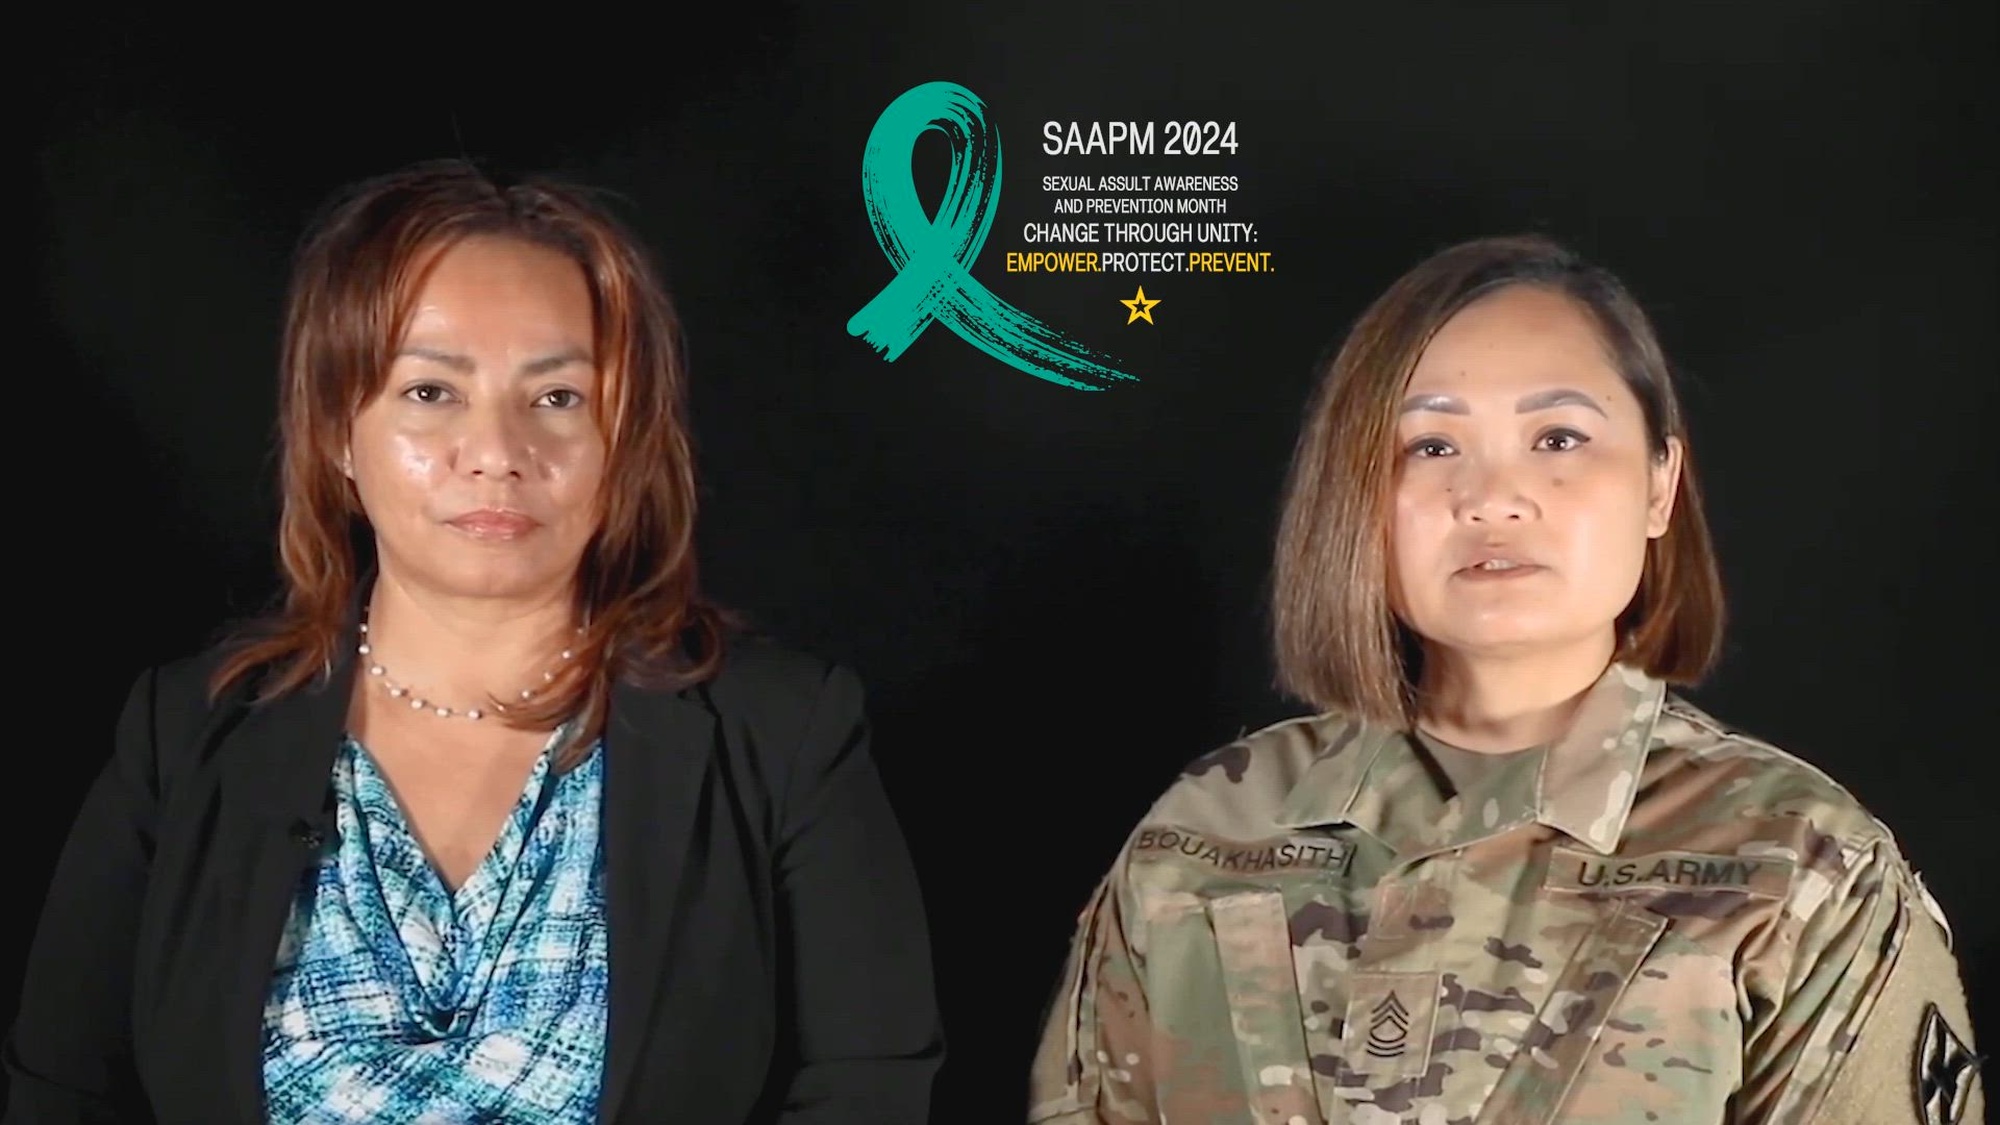 April is Sexual Assault Awareness and Prevention Month, also known as #SAAPM. This year’s theme, “Change Through Unity. Empower. Protect. Prevent,” highlights the importance of eliminating sexual assault and sexual harassment by working together to build a respectful culture for everyone. Master Sgt. Rattana Bouakhasith, lead SARC, 21st Theater Sustainment Command, Mrs. Celeste Brown, workforce management specialist, 405th Army Field Support Brigade, Sgt. Taariq D. Edge, G-1, U.S. Nato Brigade, and Spc. Vanielle Diggs, strength management specialist, 30th Medical Brigade, discusses how to fight against sexual assault and foster a climate of trust for all members of the U.S. Army team.